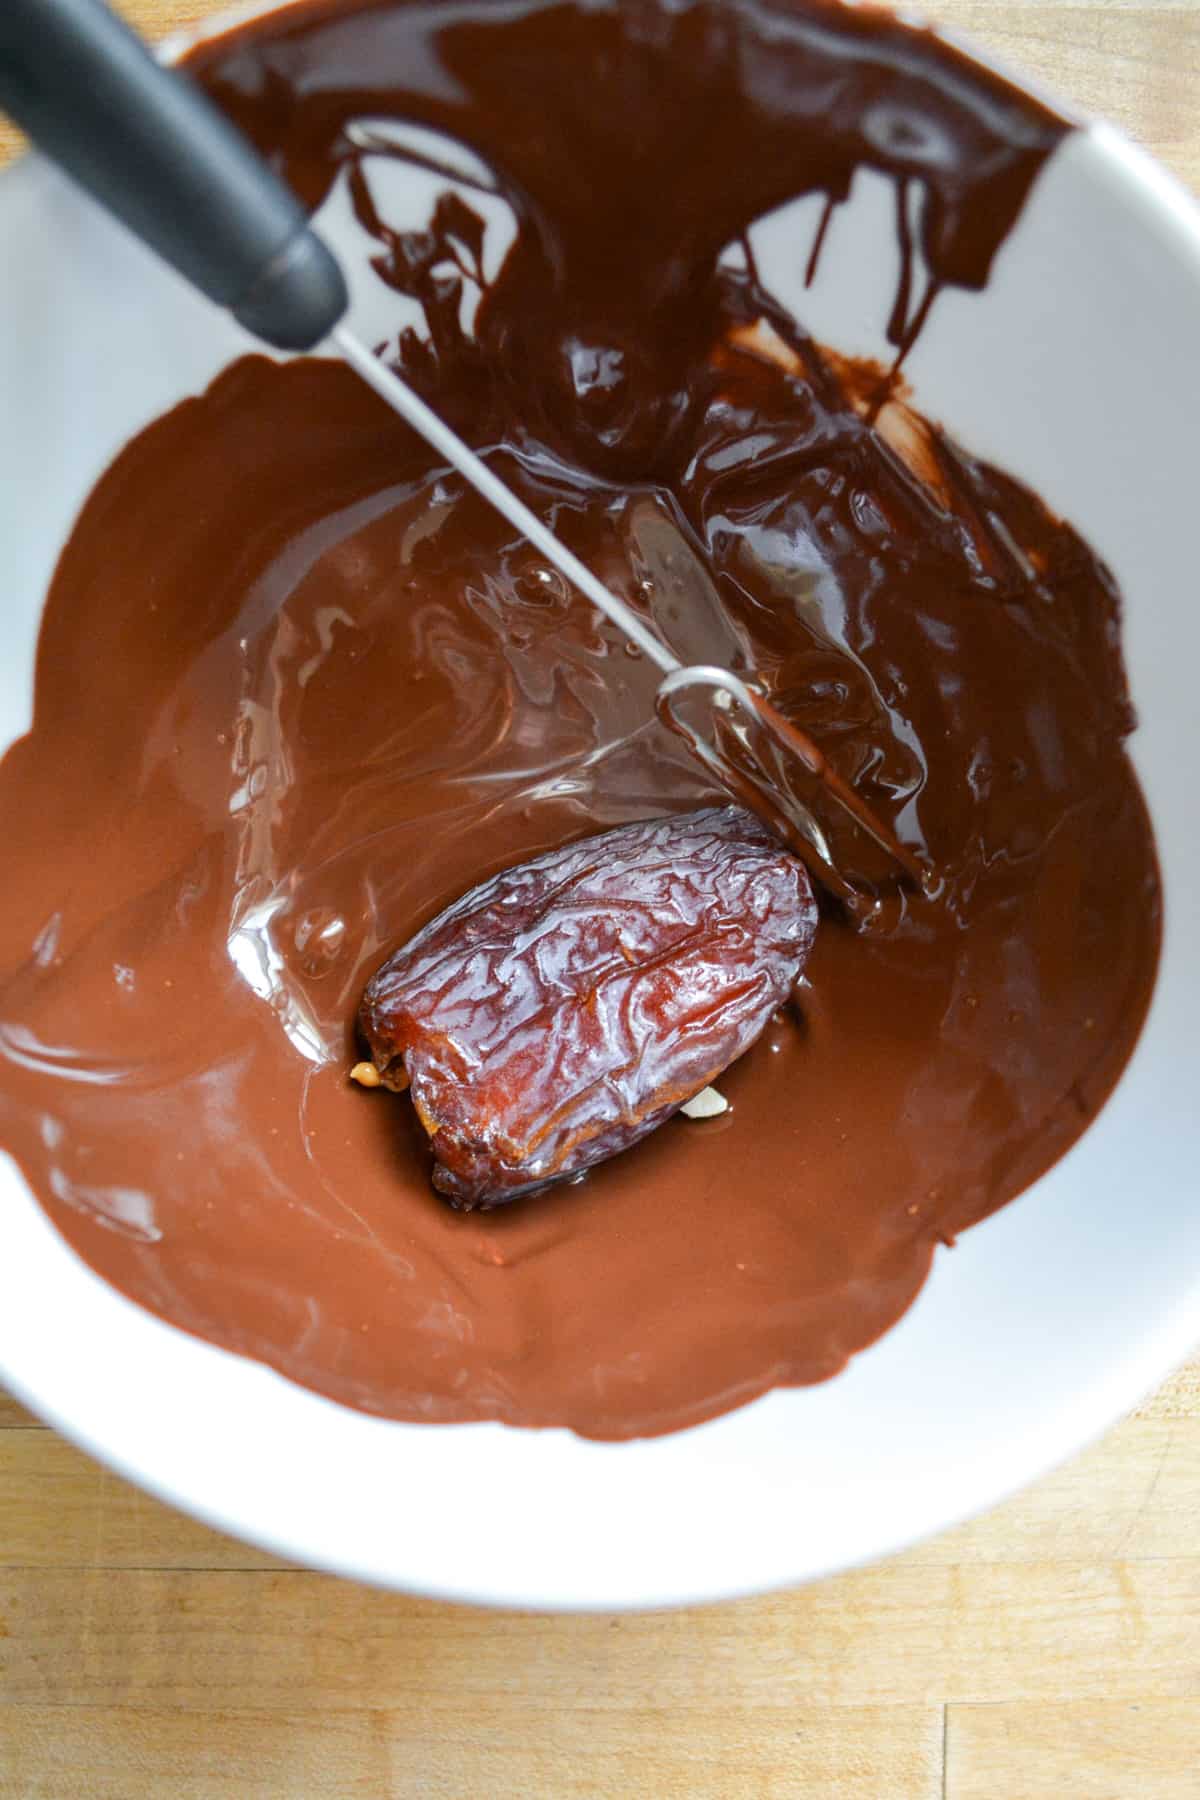 Date being covered in the melted chocolate. 